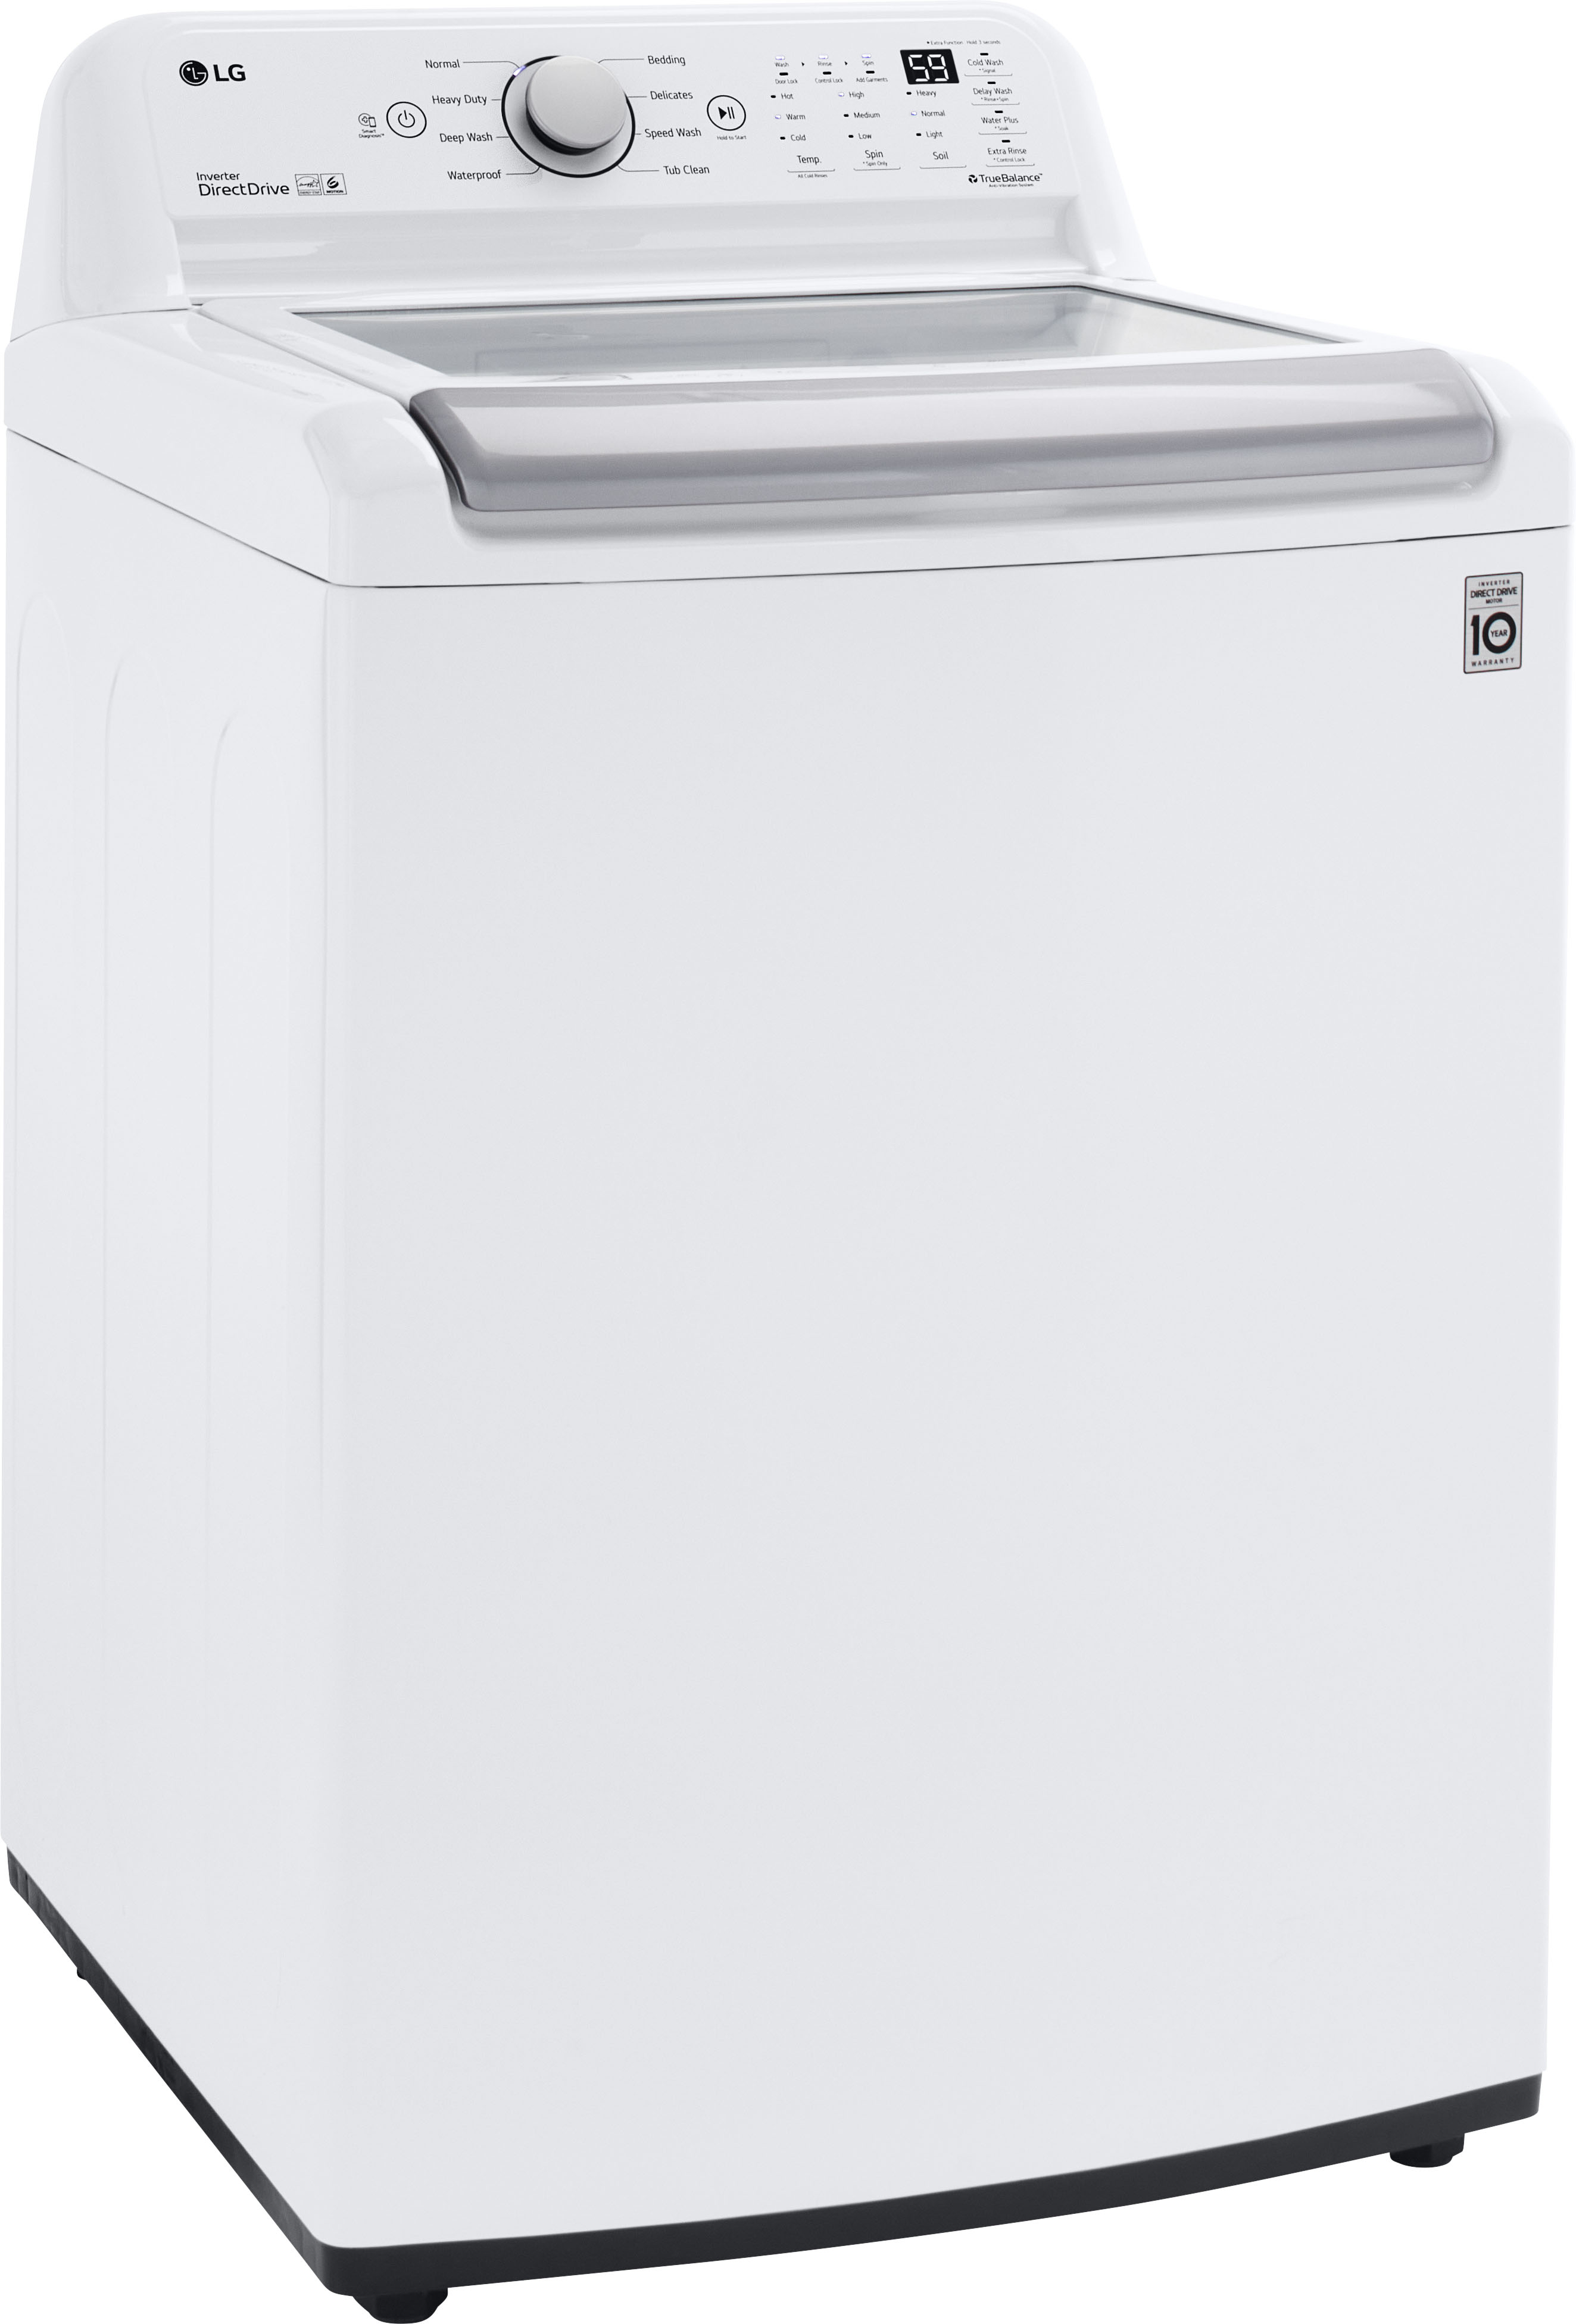 Angle View: Samsung - 5.1 cu. ft. Smart Top Load Washer with ActiveWave Agitator and Super Speed Wash - Champagne